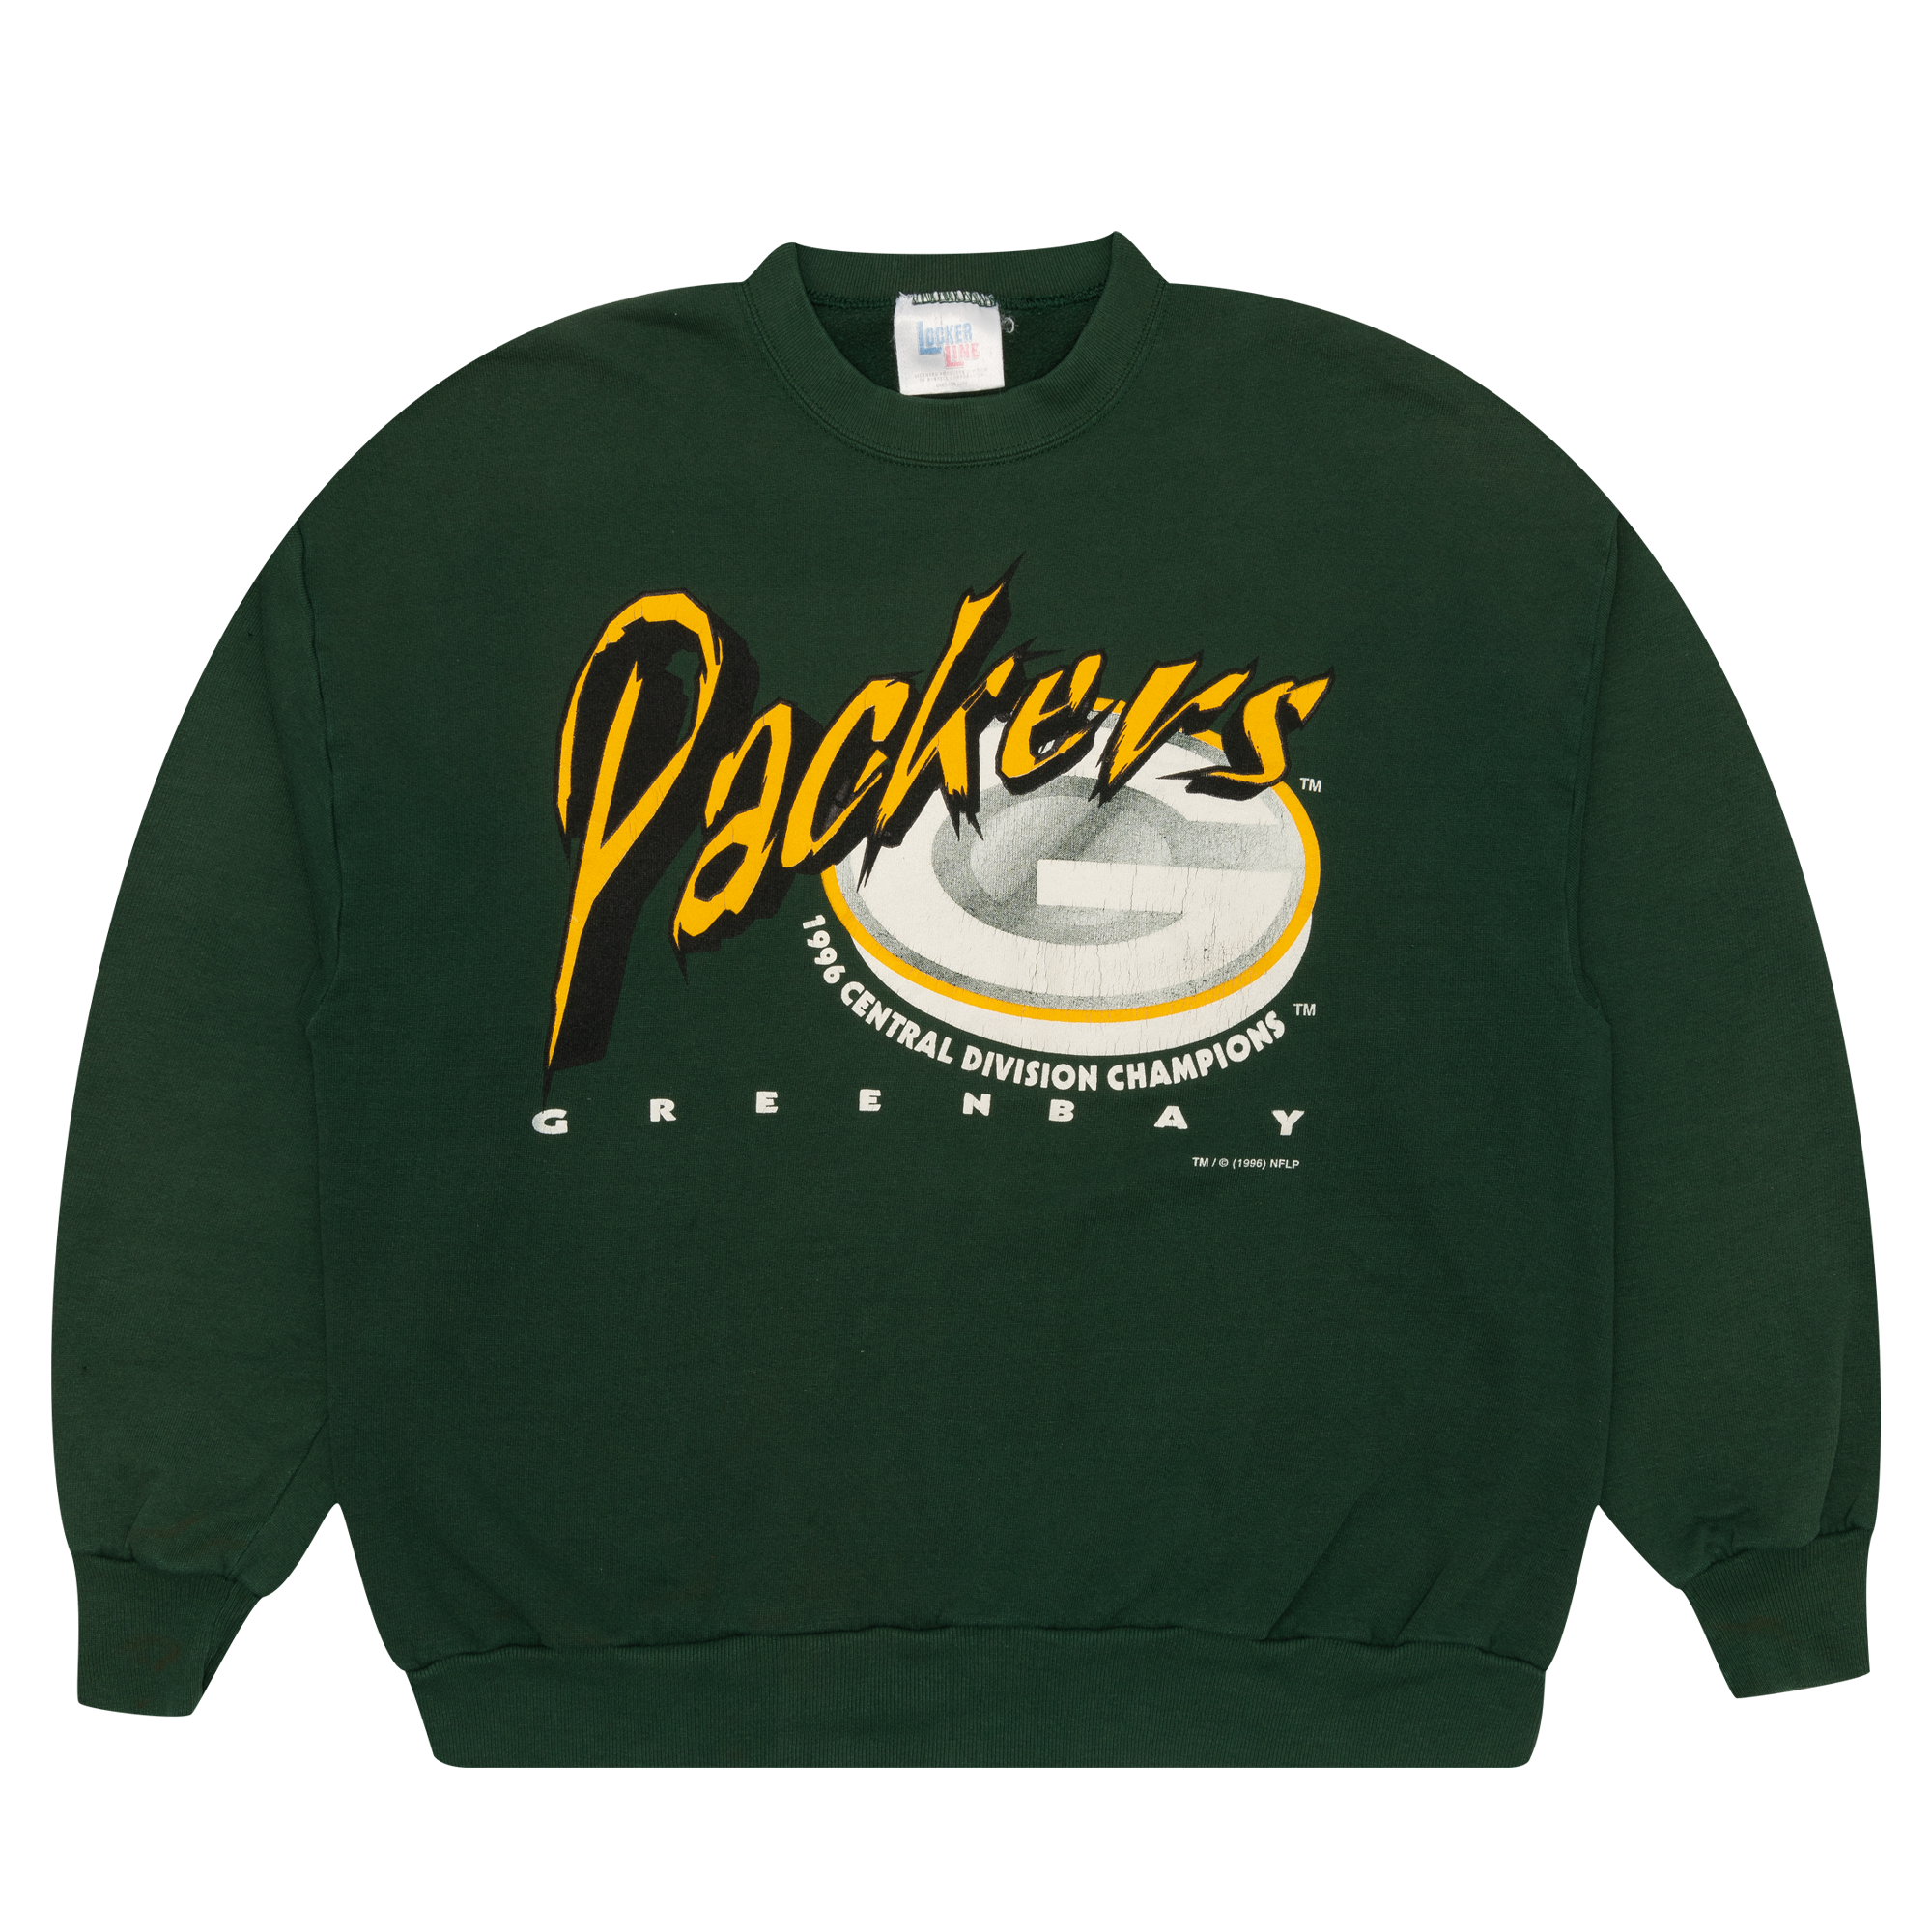 Green Bay Packers "Central Division Champs" 1996 NFL Crewneck Green-PLUS